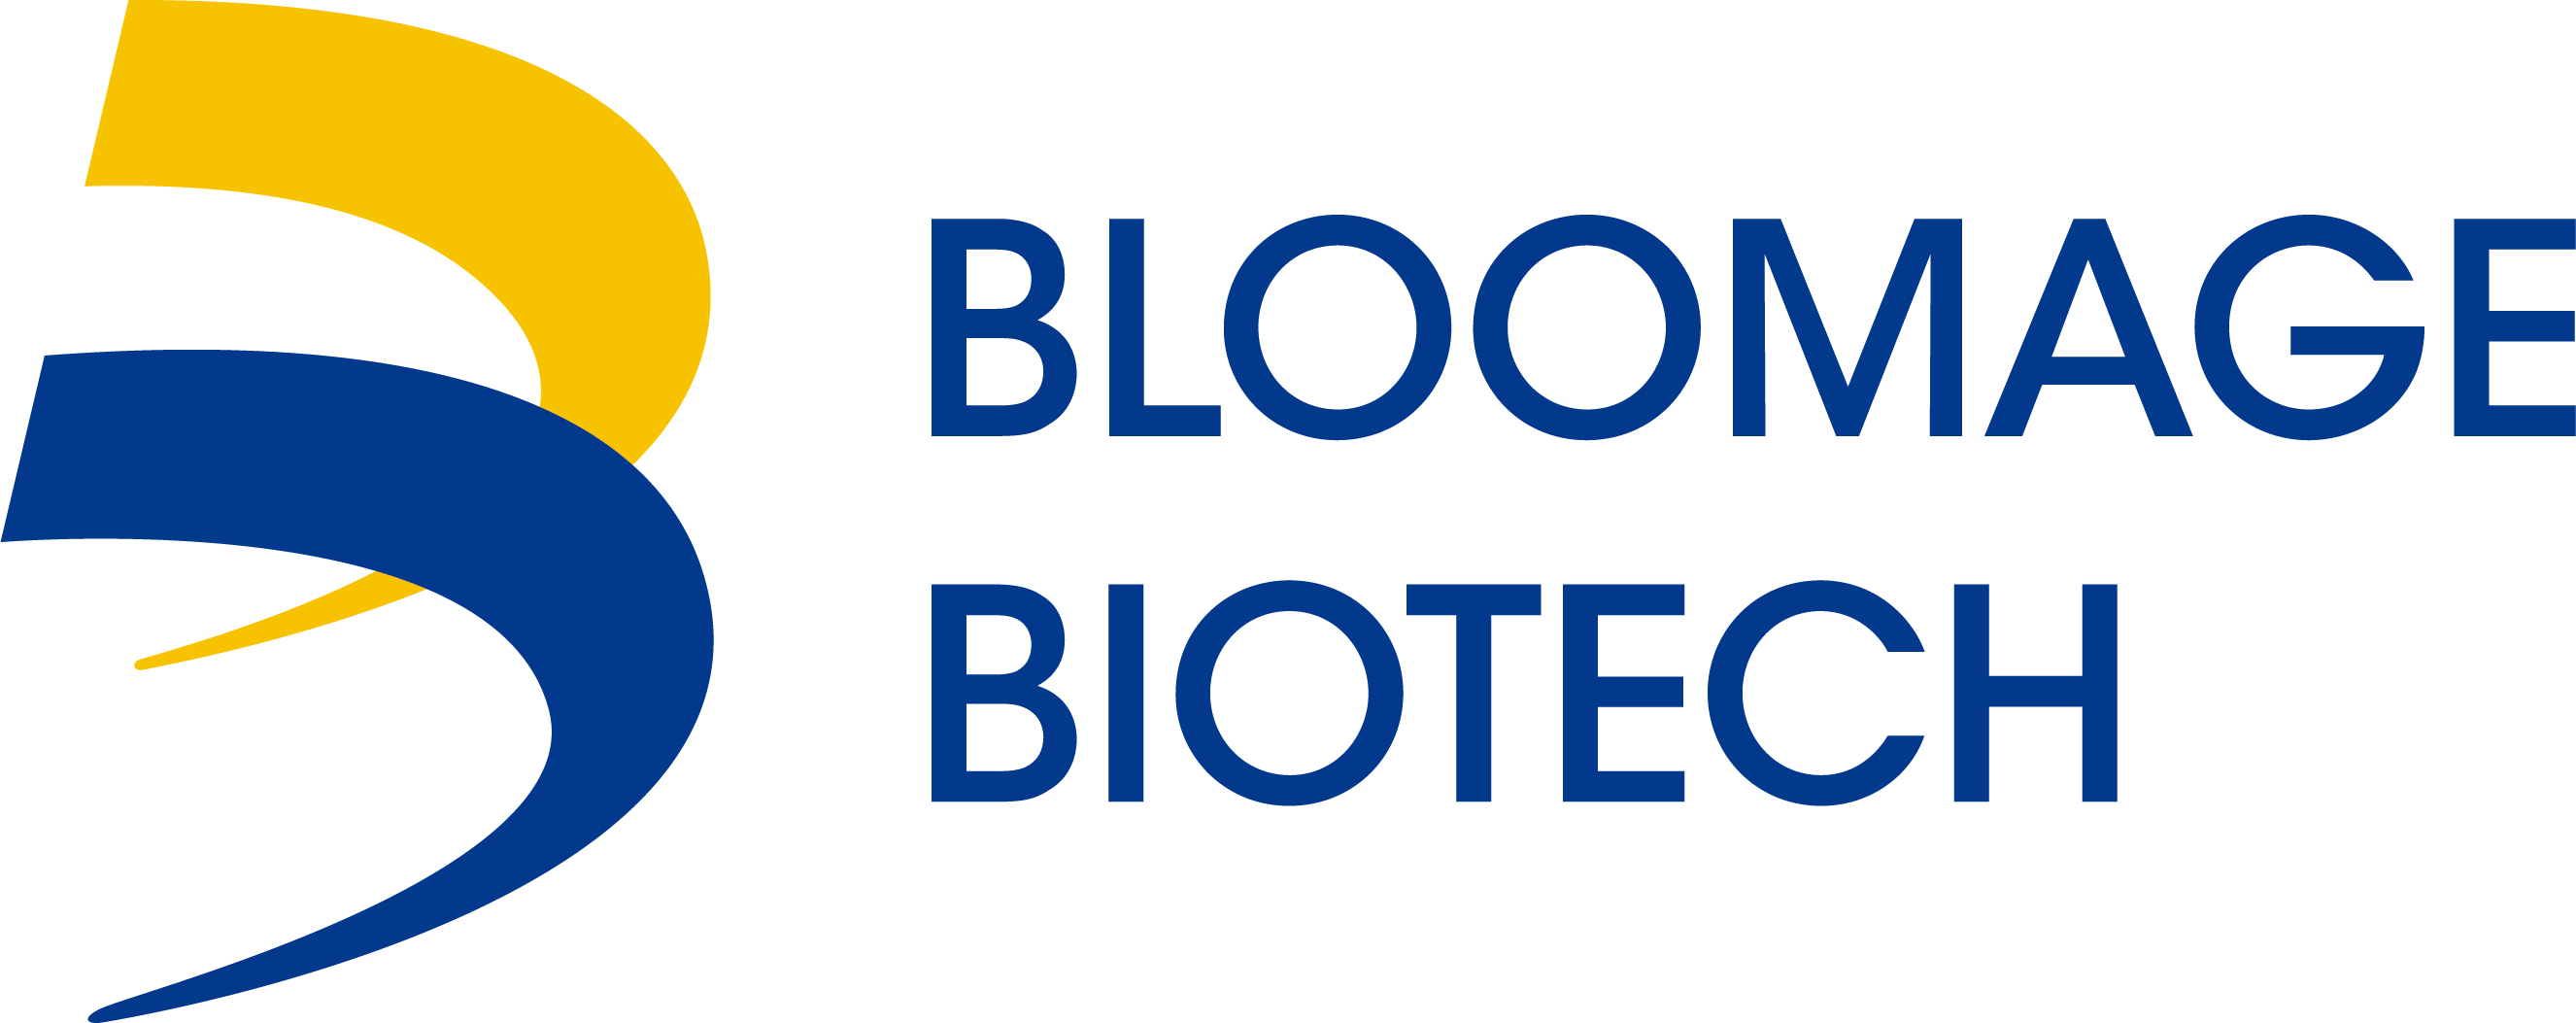 Bloomage Biotech